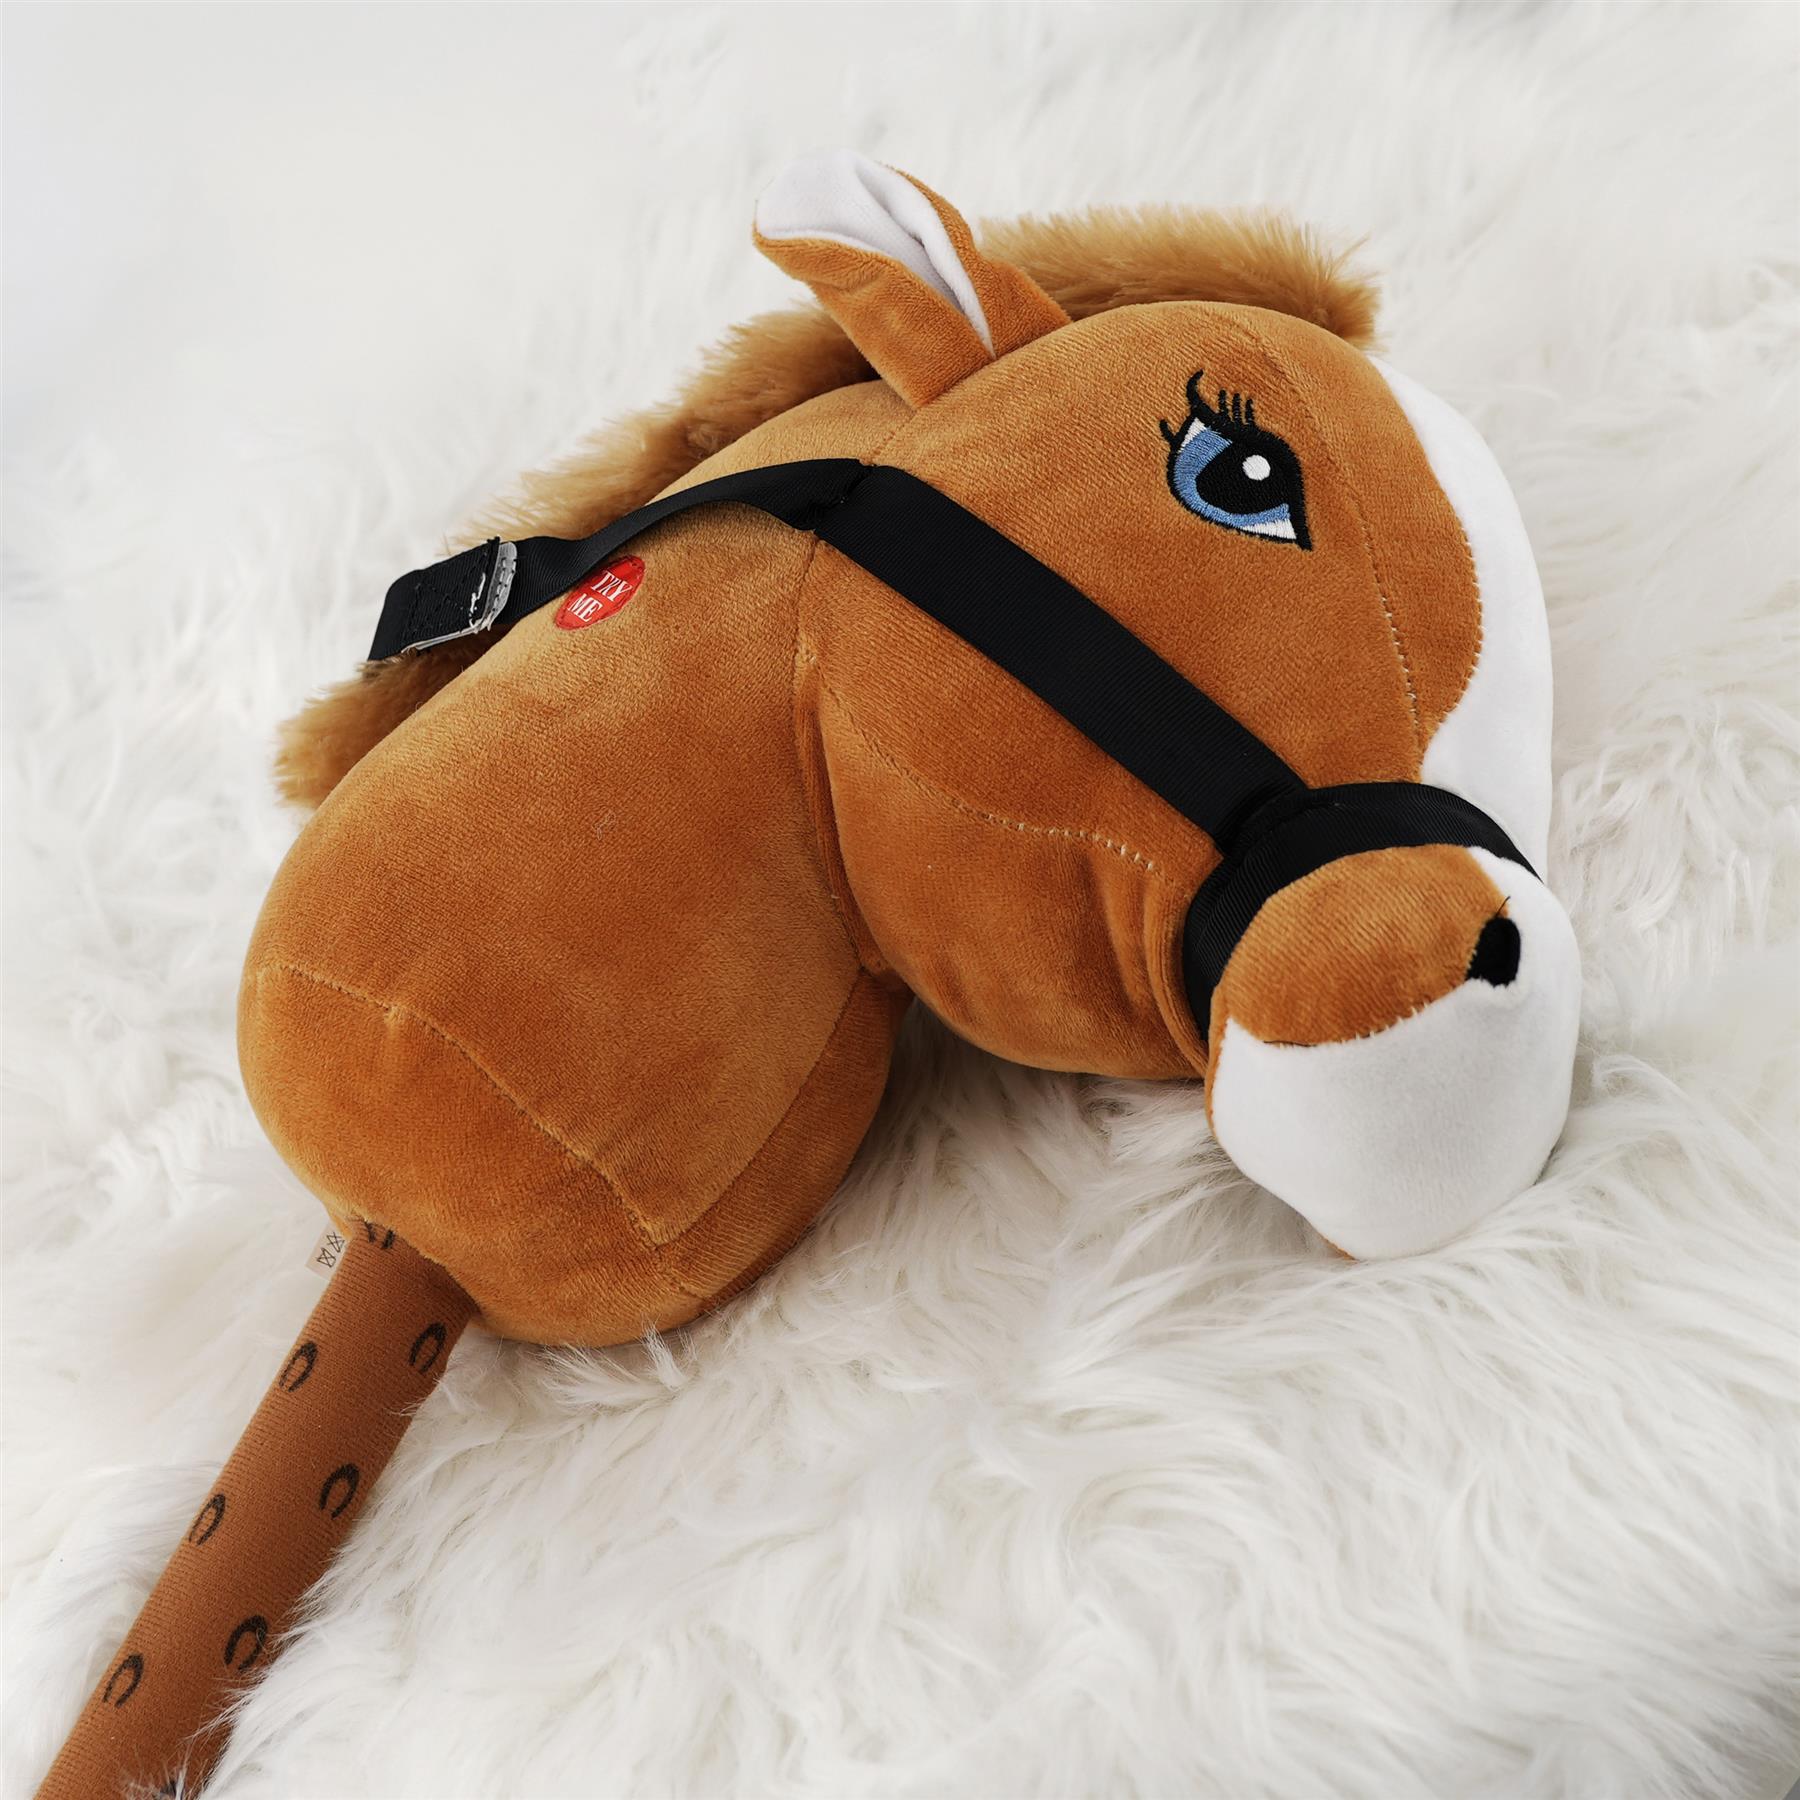 Brown Hobby Horse by The Magic Toy Shop - The Magic Toy Shop